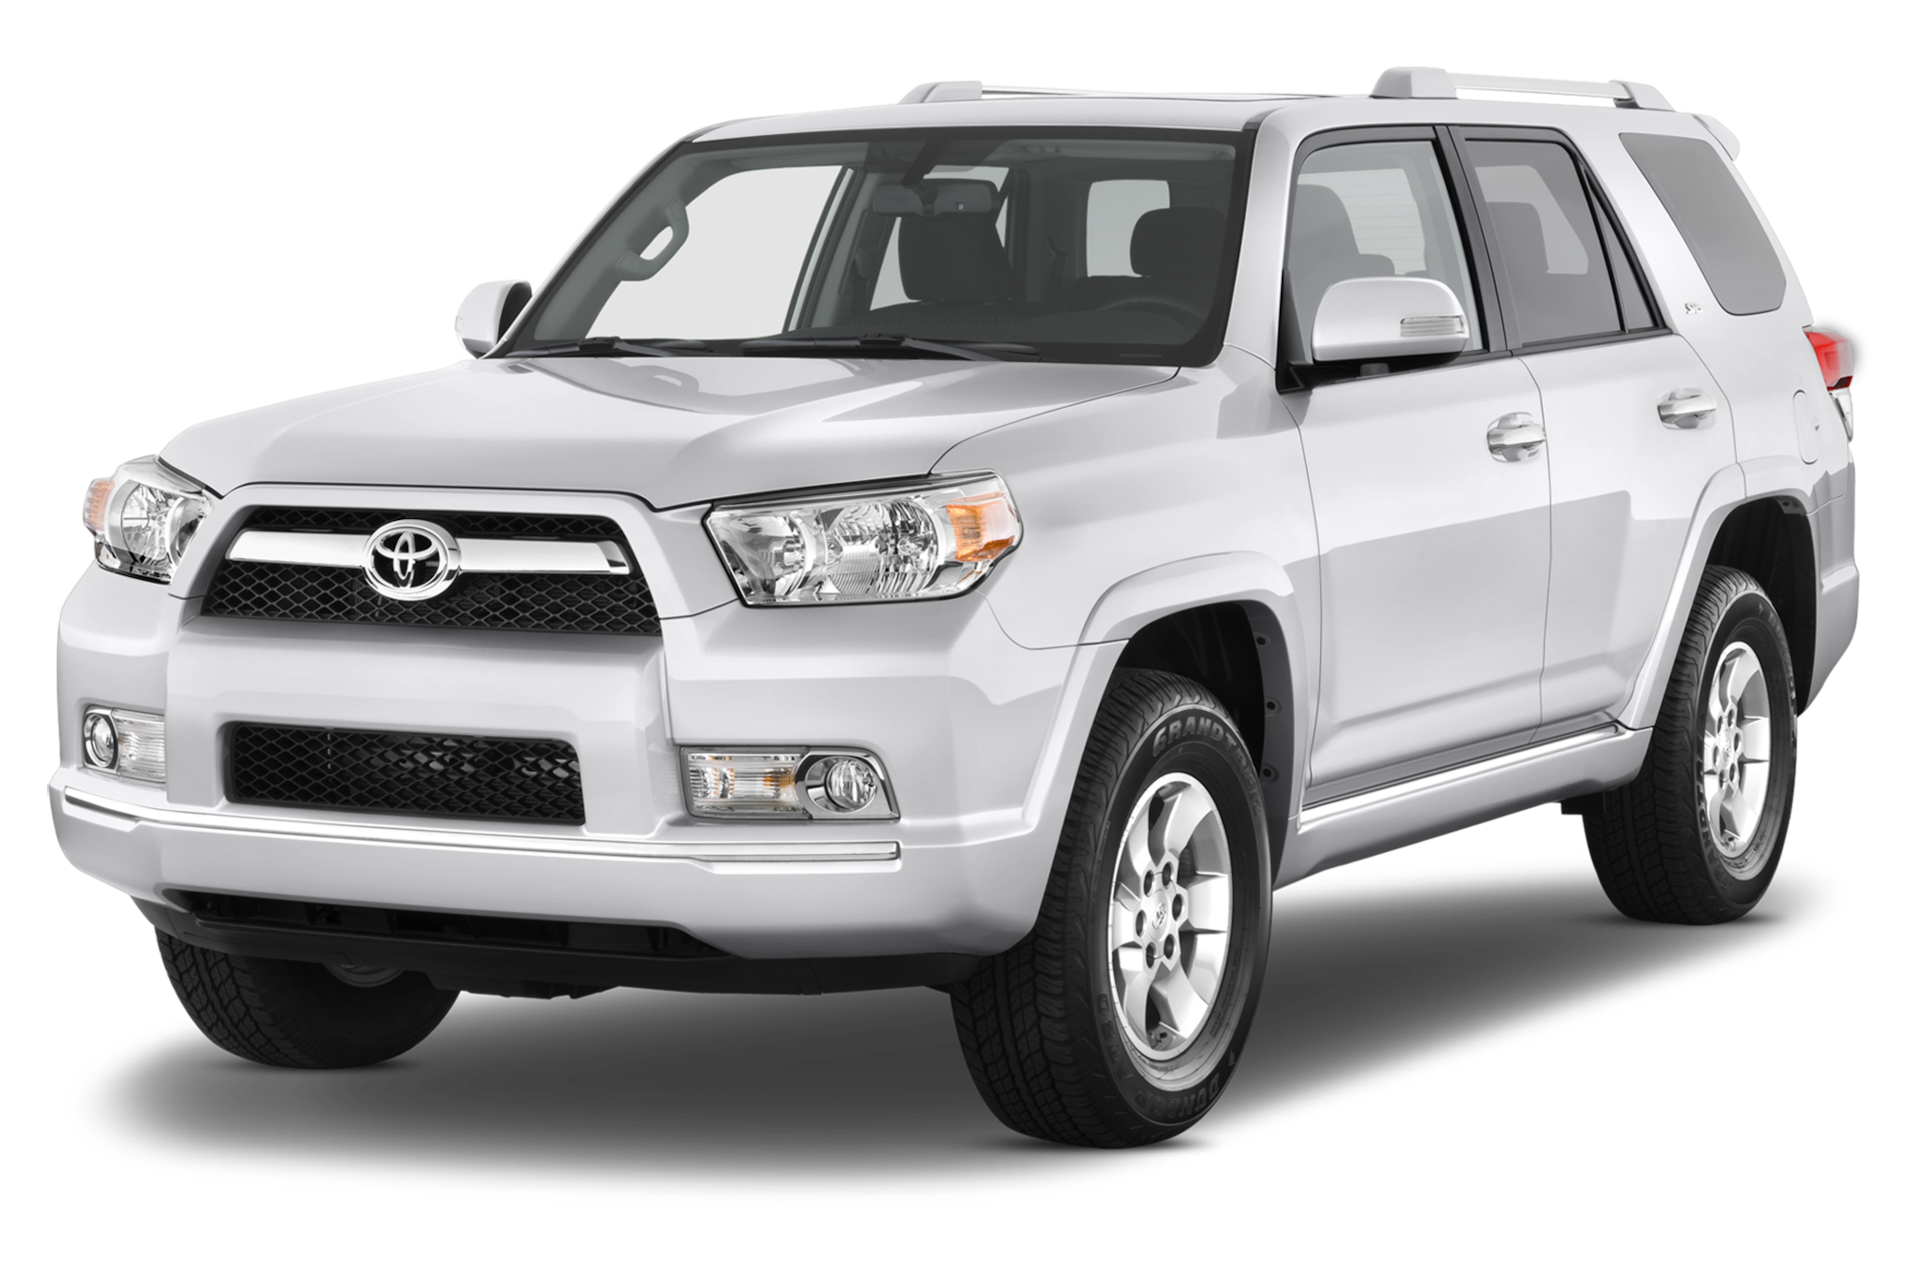 2012 Toyota 4Runner Prices, Reviews, and Photos - MotorTrend